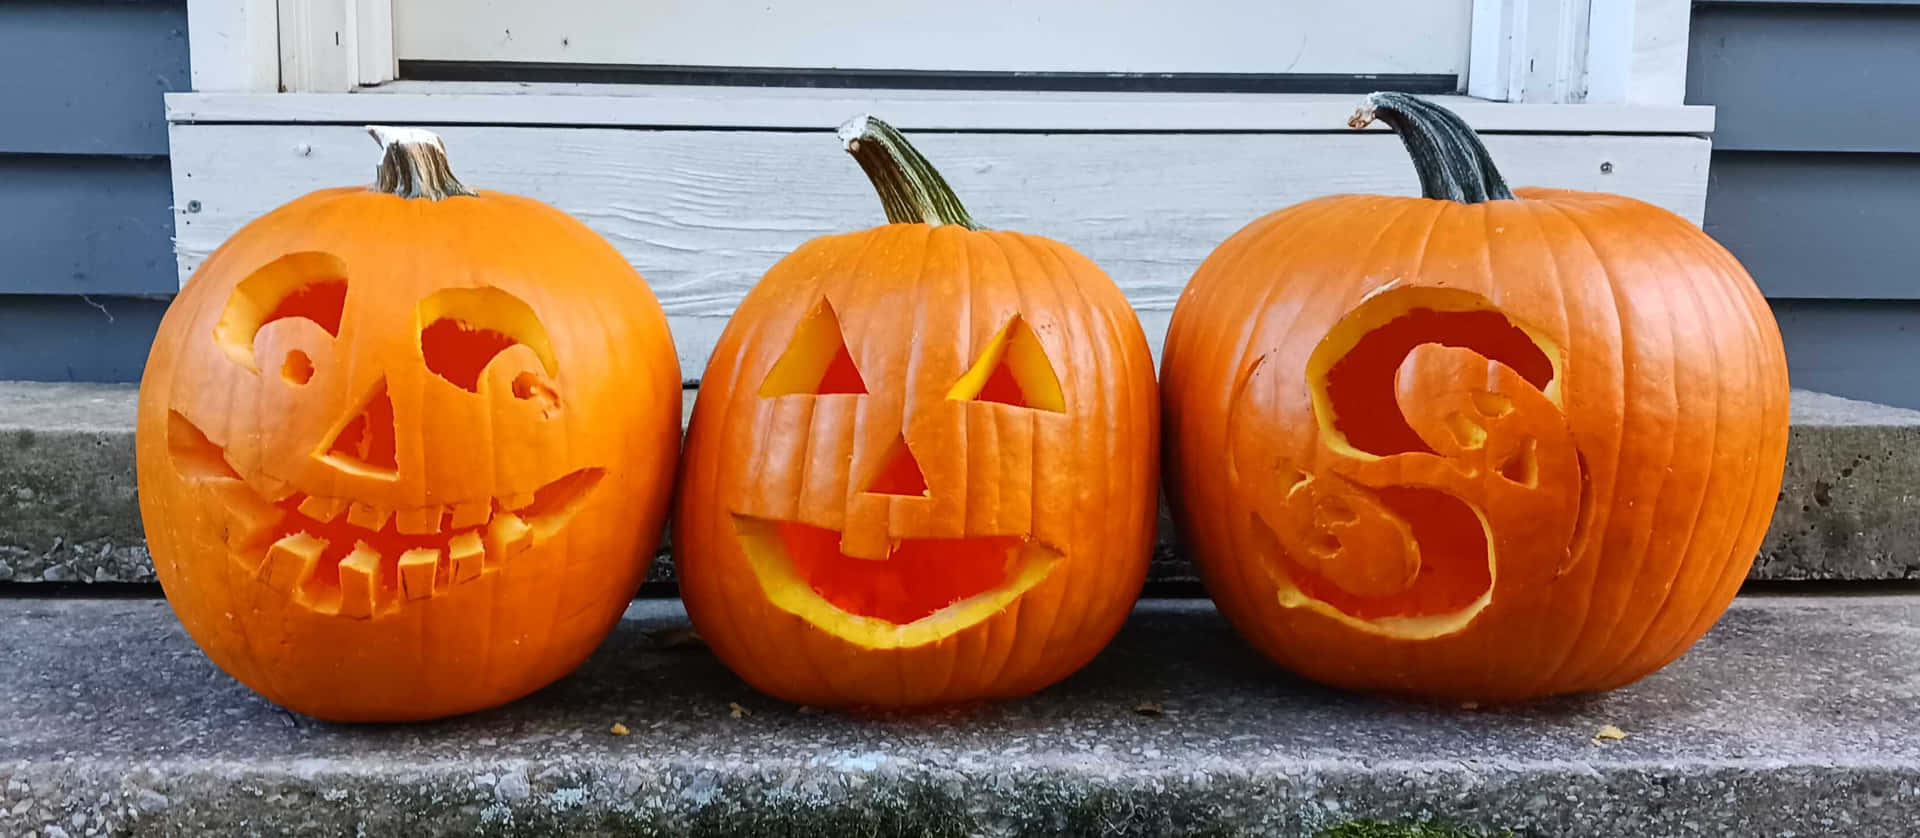 Three Halloween Pumpkin Carving Pictures